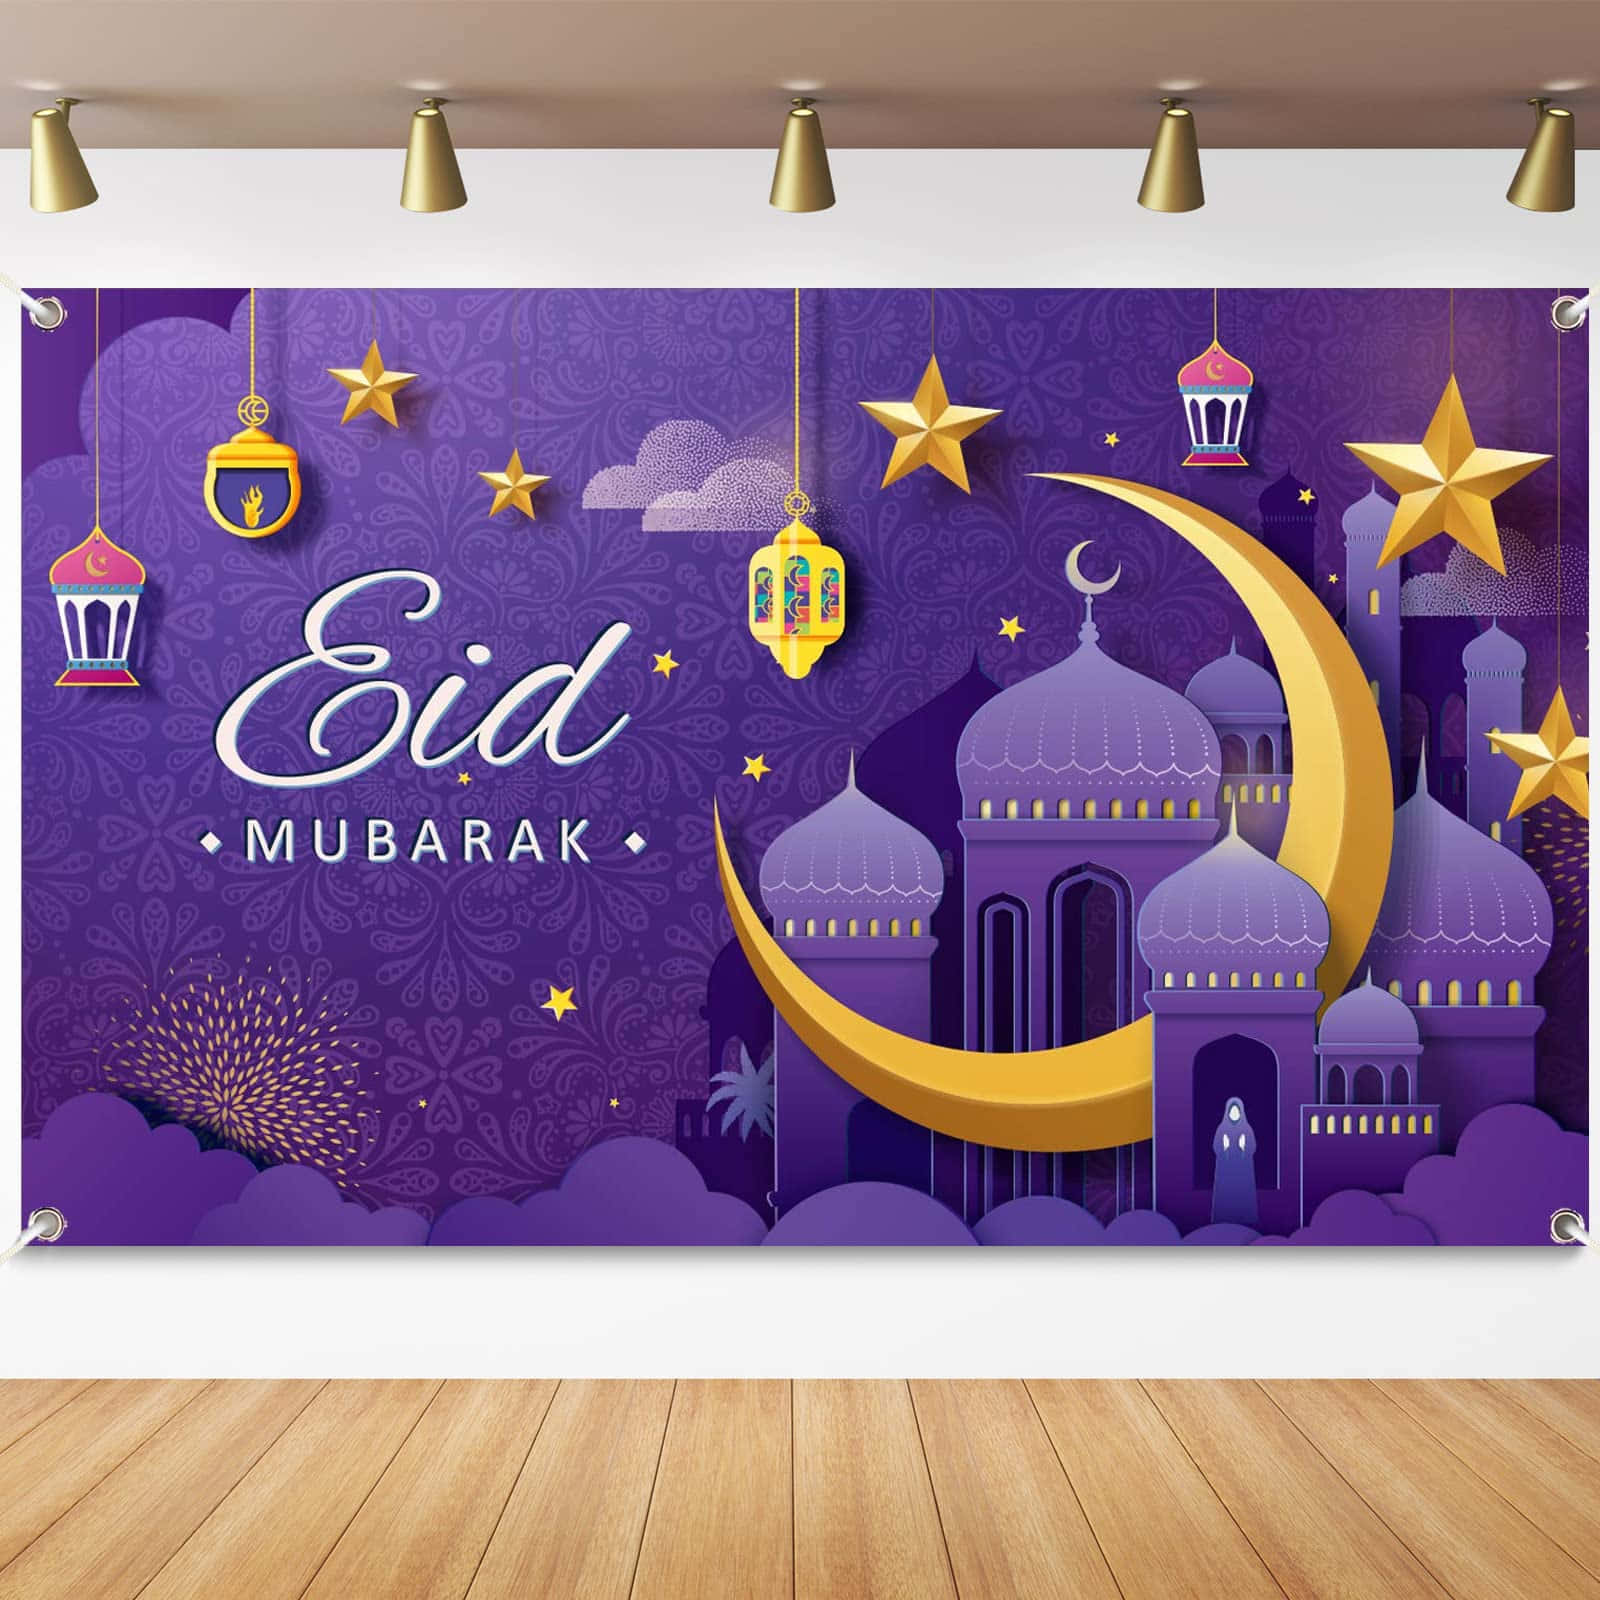 Islamic & Muslim Wallpapers : Backgrounds and pictures of Allahu artwork,  mosques posters & Eid Mubarak greeting cards | App Price Intelligence by  Qonversion